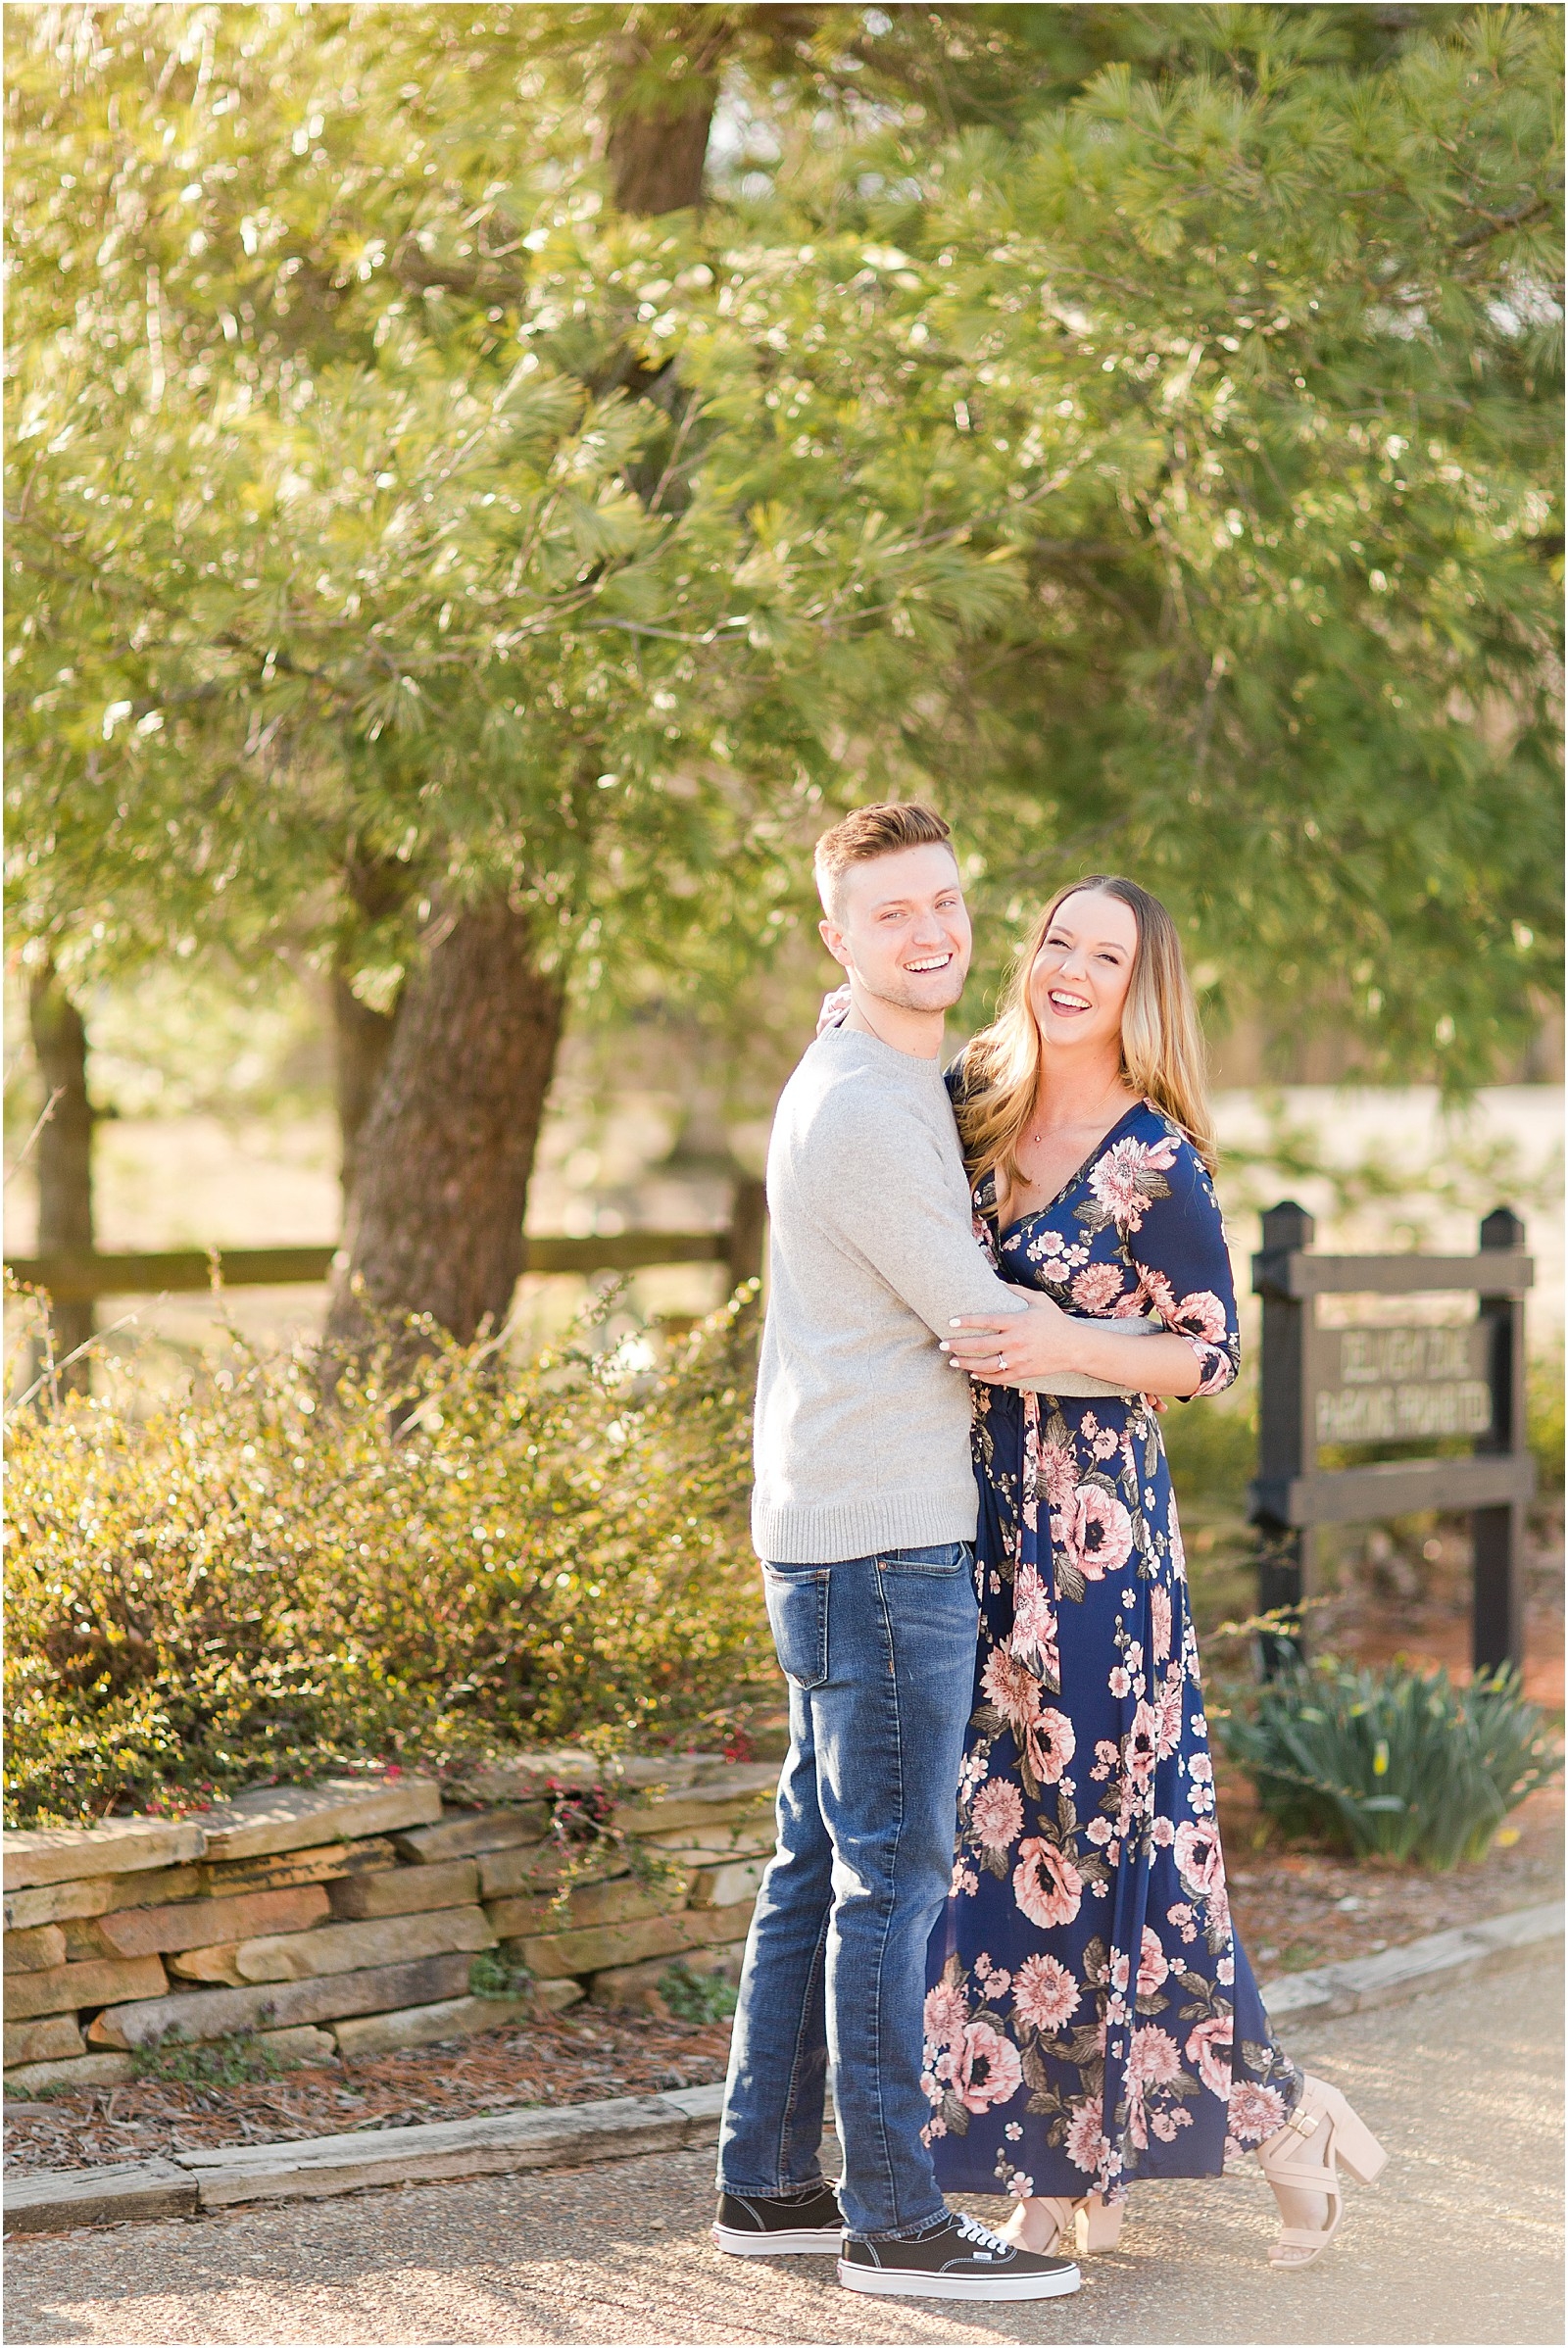 Rachel and Nick | Lincoln State Park Engagement Session 002.jpg